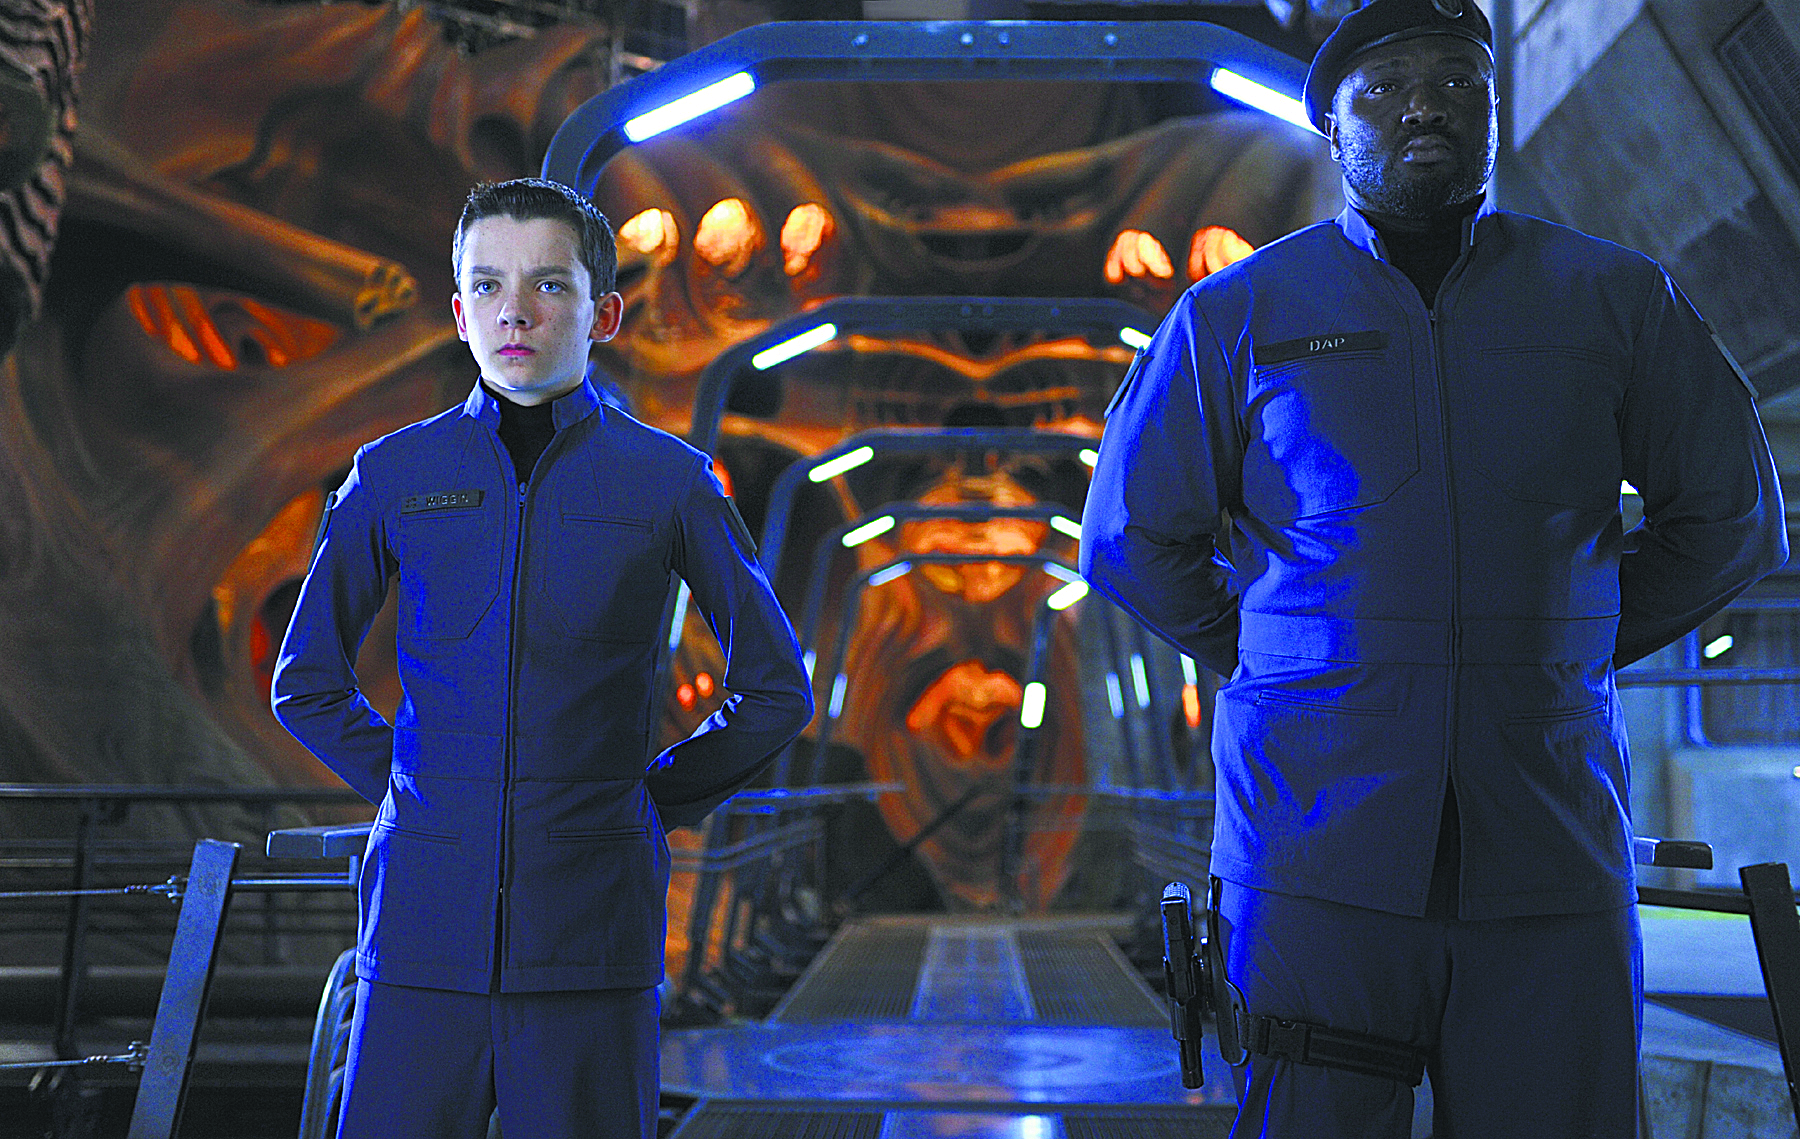 Scenes from "Ender's Game" (48195)